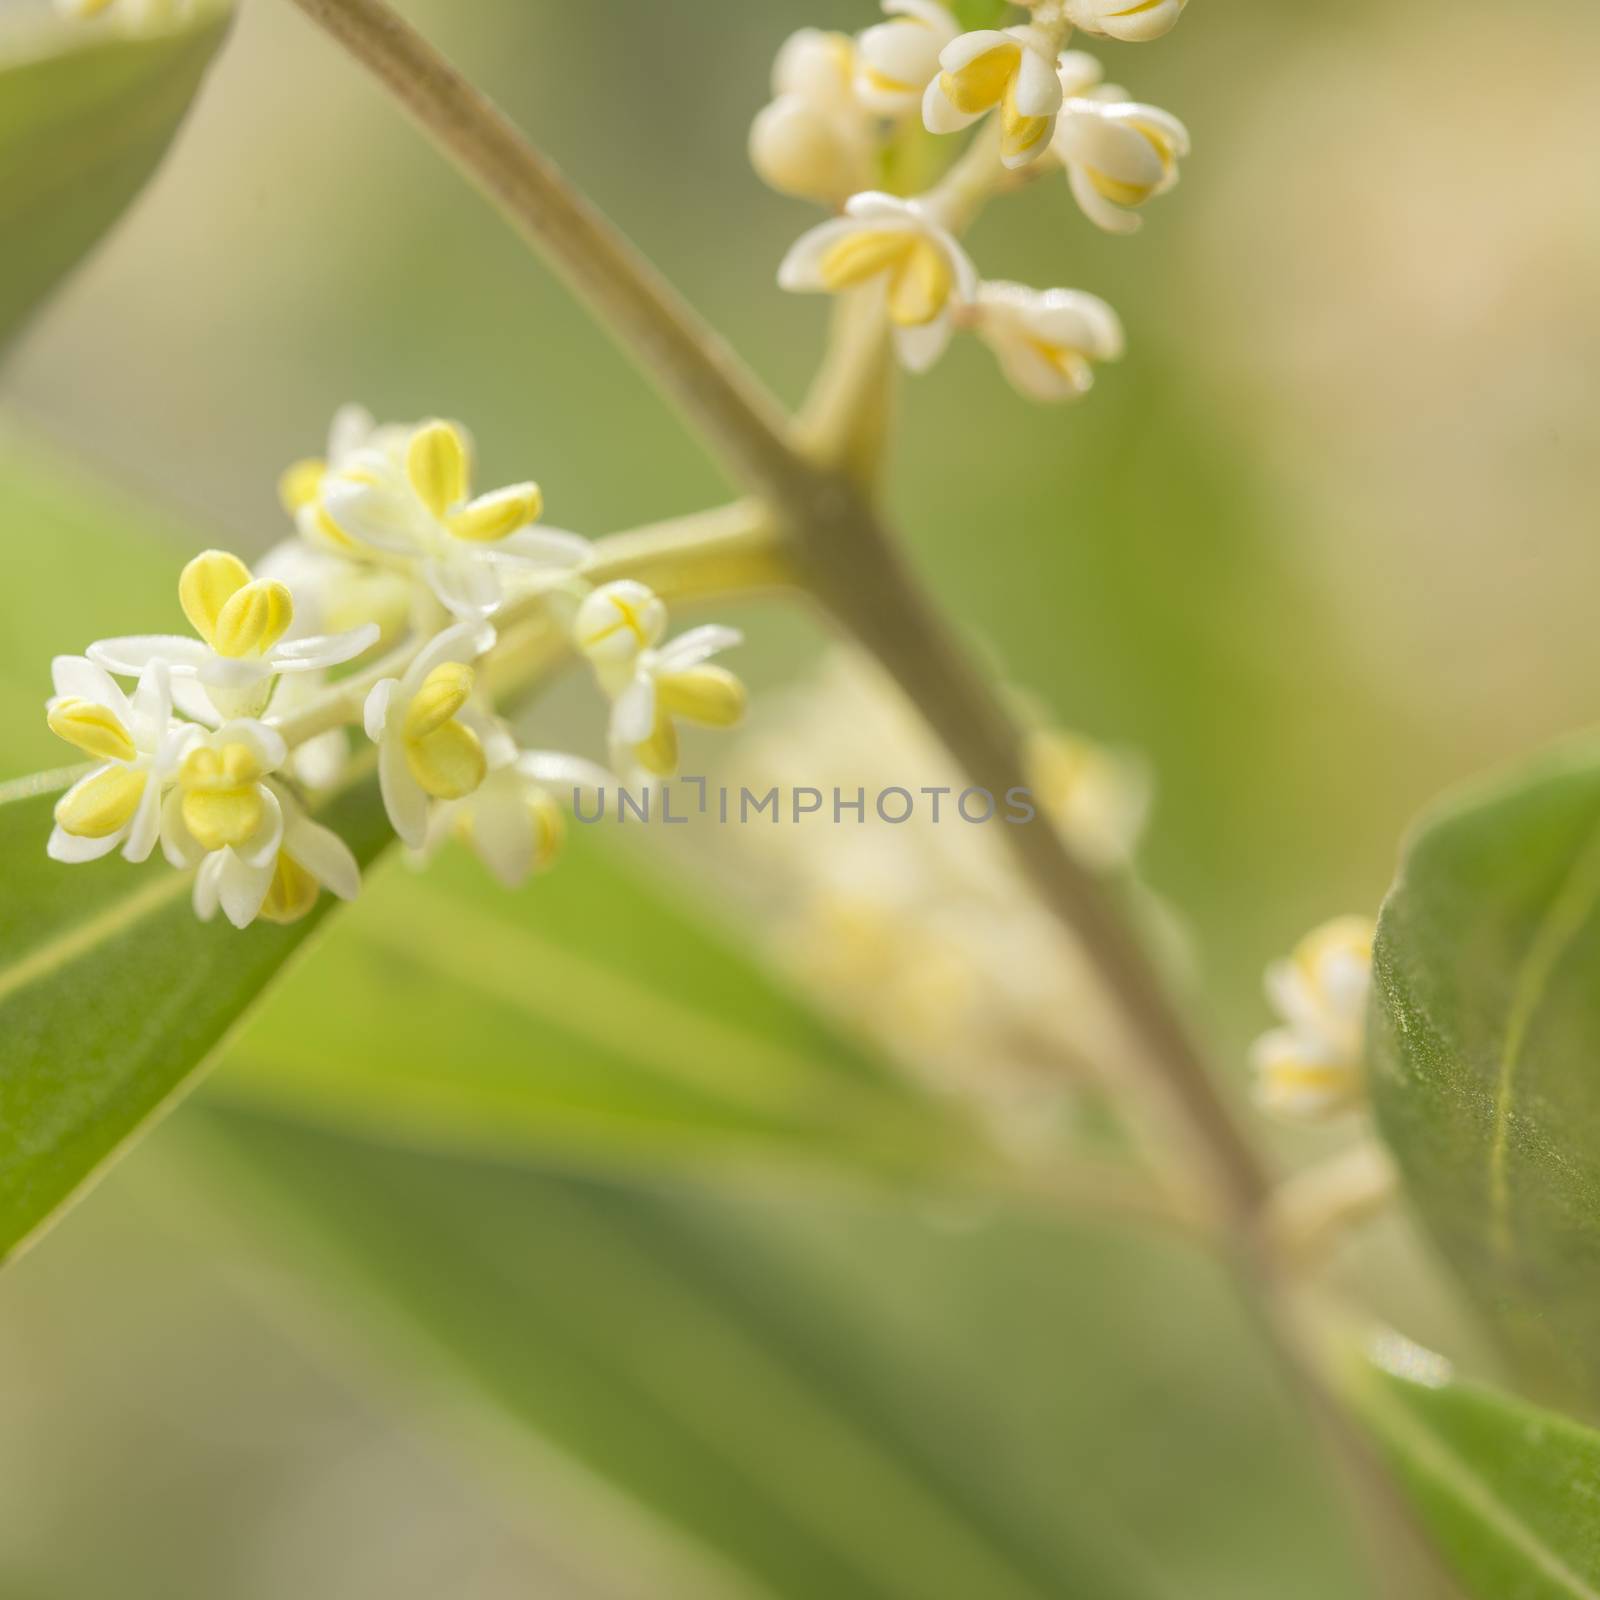 Square image of an olive tree branch and detail of flowers with blurry leaves at the background.